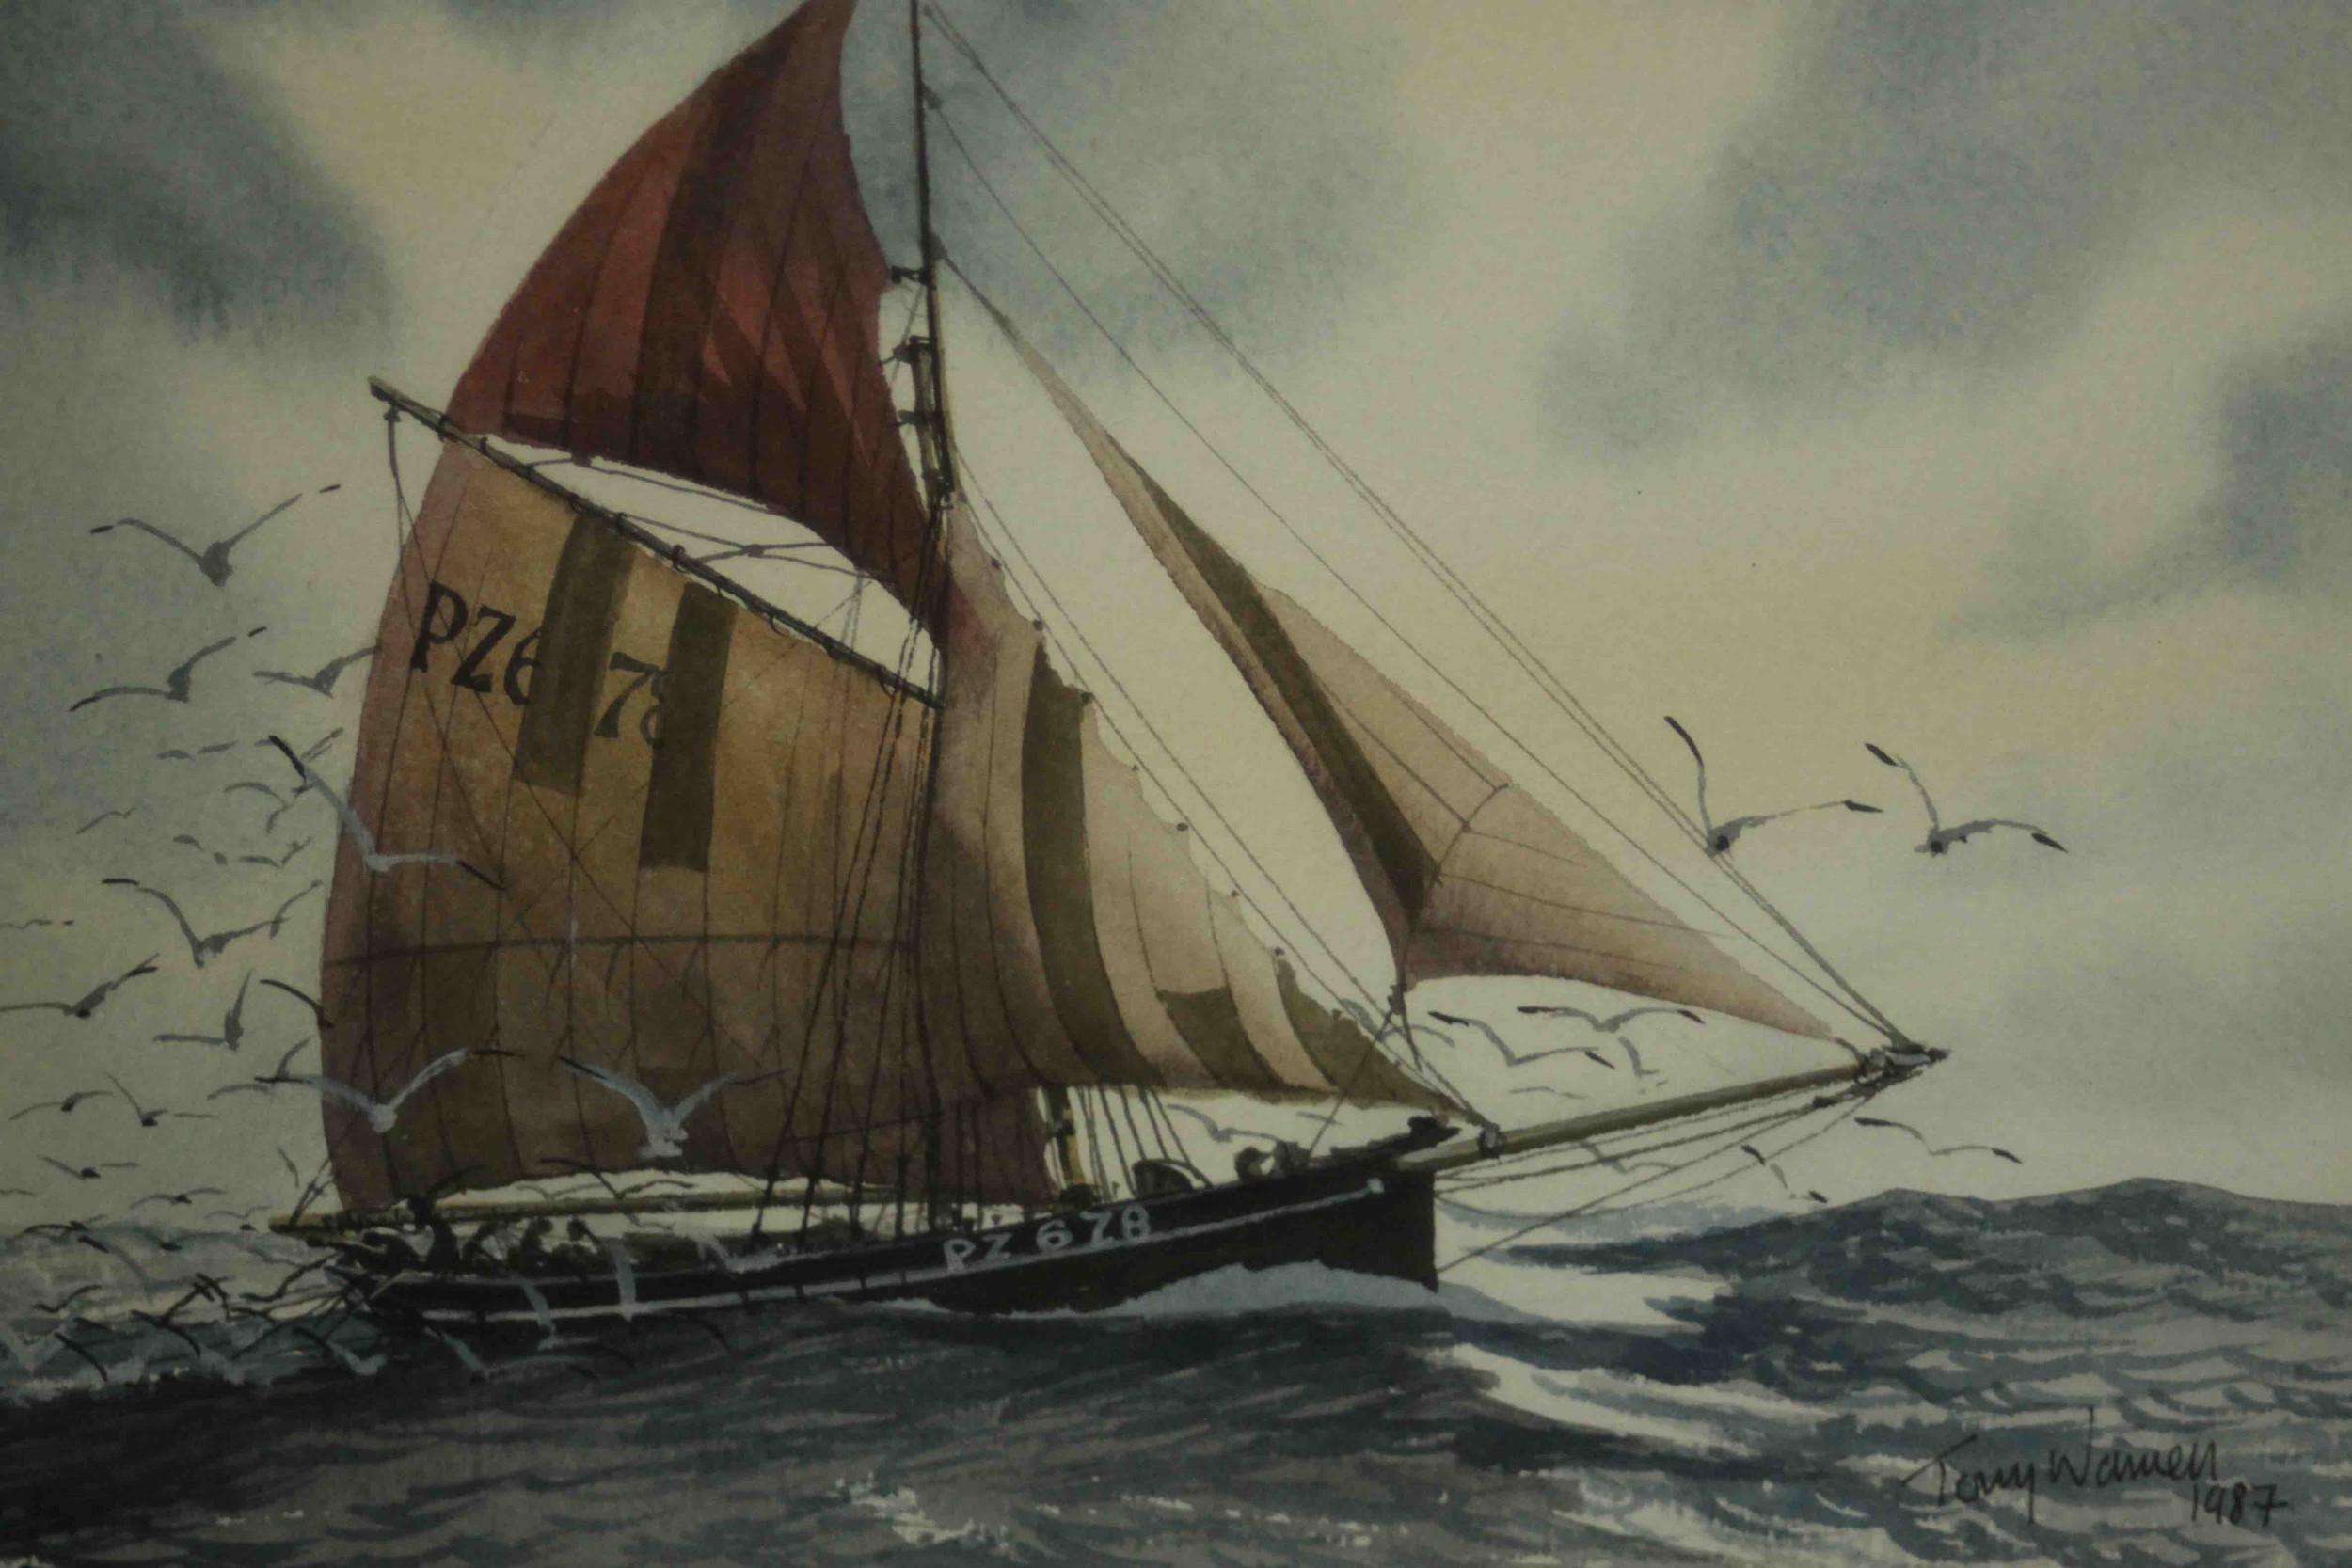 Tony Warren (1930-1994), two studies of sailing ships, watercolours, signed and dated 1987 lower - Image 5 of 8